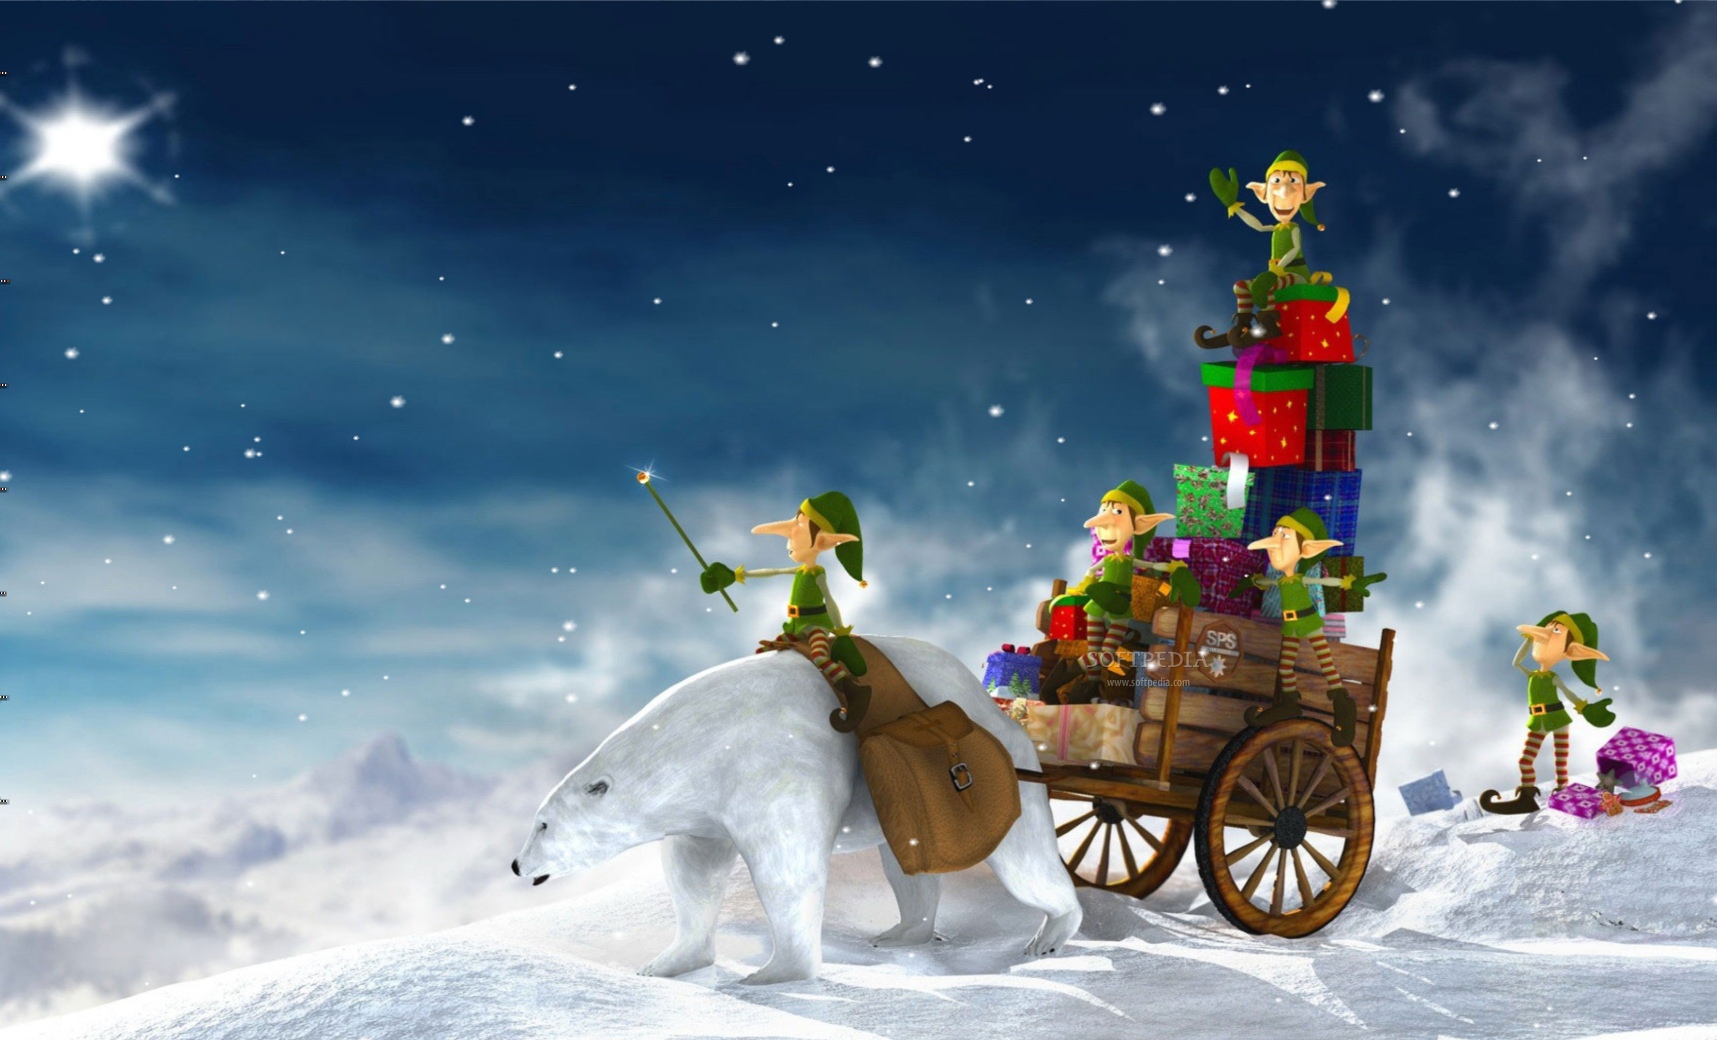 Santa S Elves Animated Desktop Wallpaper This Is The Image That Will